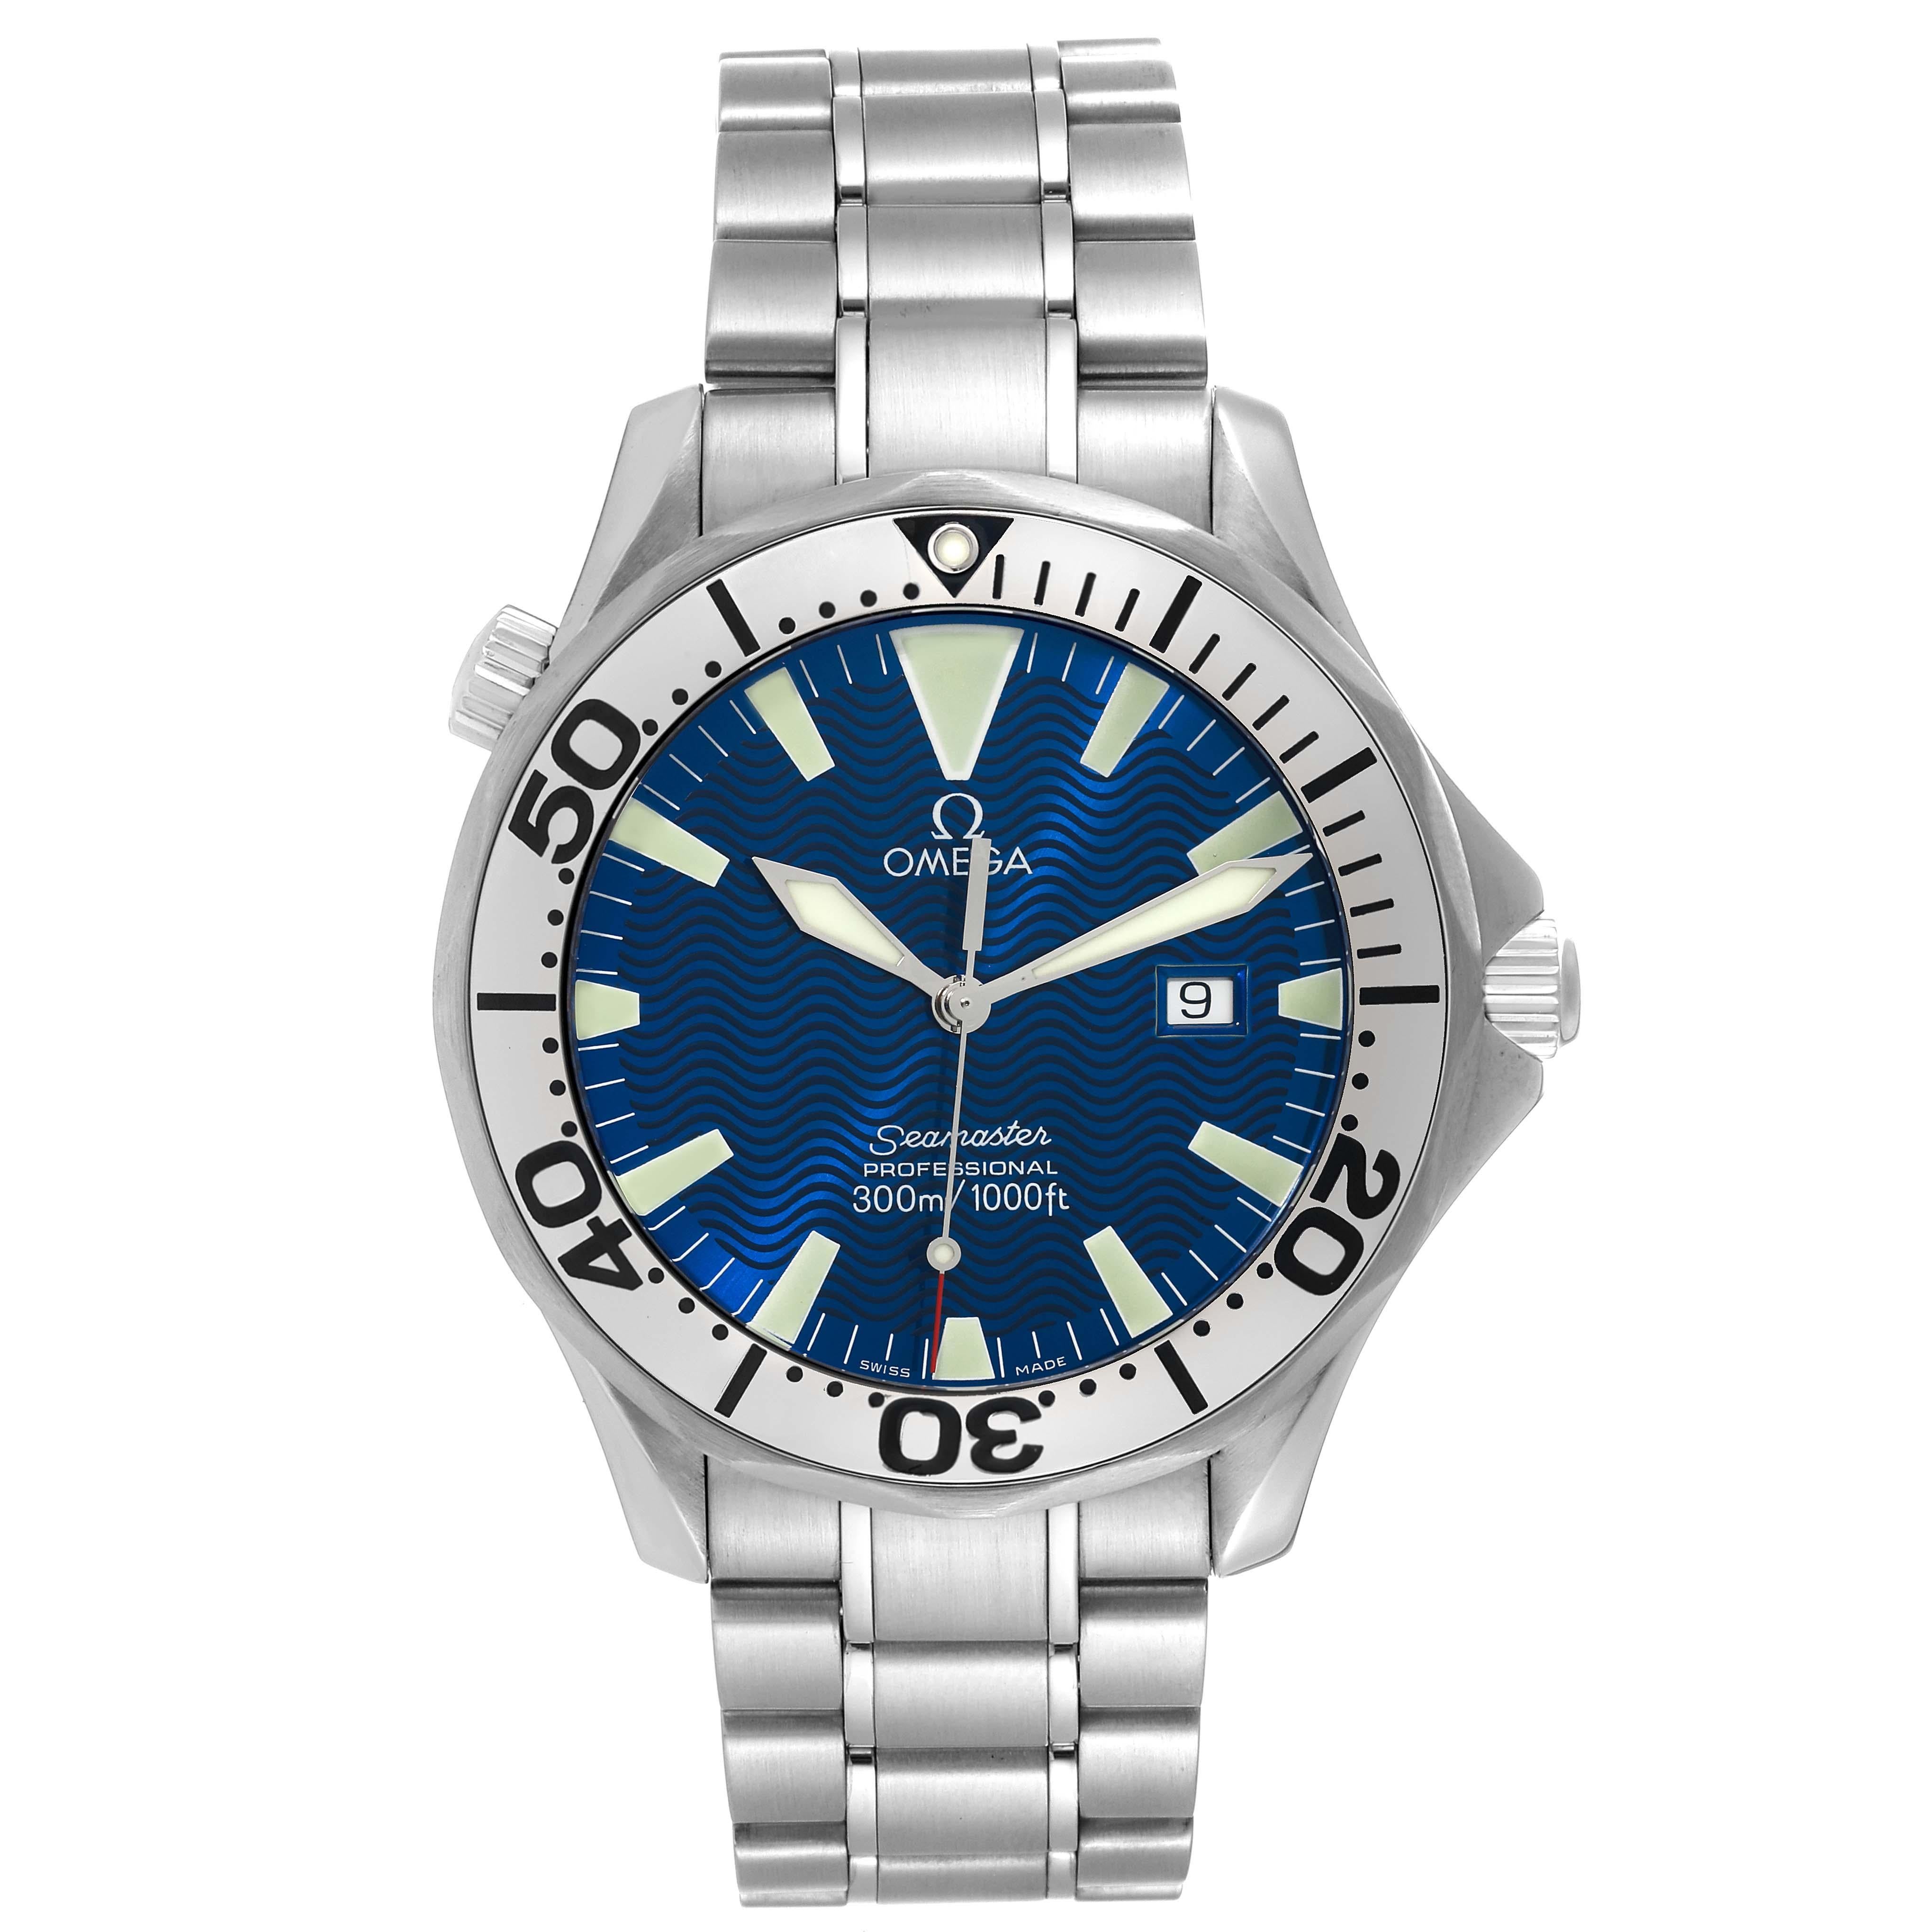 Omega Seamaster Electric Blue Wave Dial Steel Mens Watch 2265.80.00. Quartz precision movement with rhodium-plated finish.  Caliber 1538. Stainless steel case 41.0 mm in diameter.  Omega logo on the crown. Polished stainless steel unidirectional